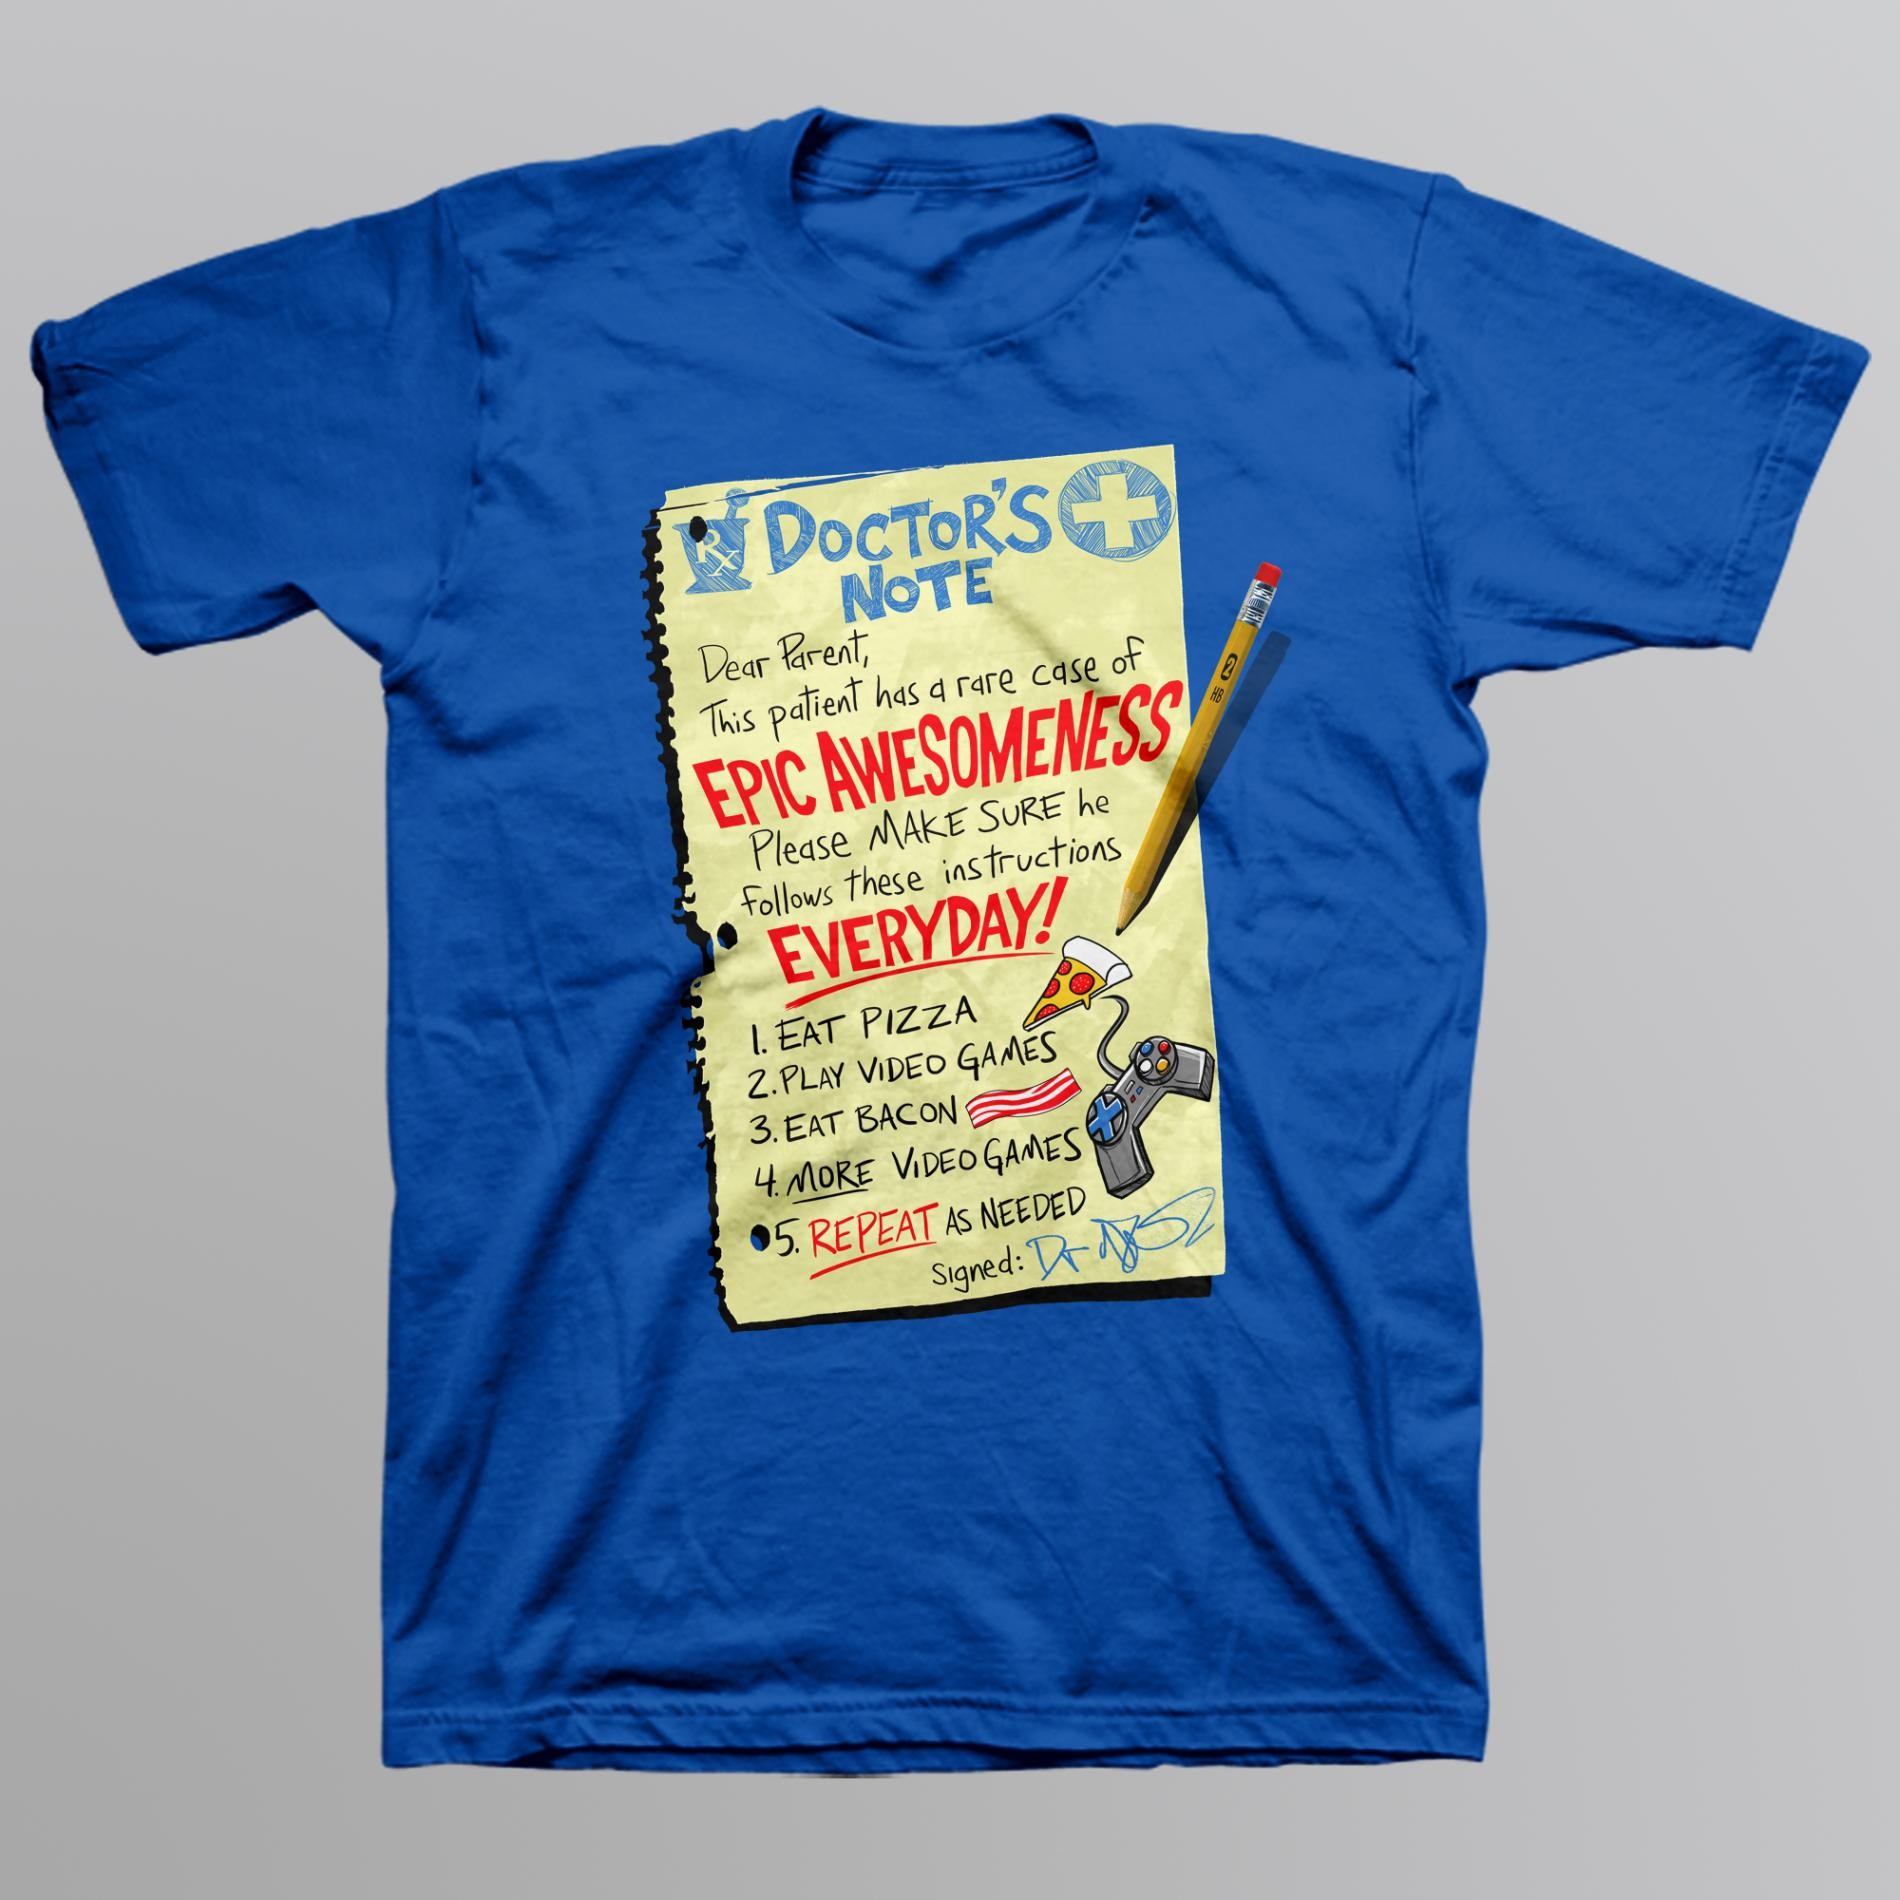 Route 66 Boy's Graphic T-Shirt - Doctor's Note  Epic Awesomeness